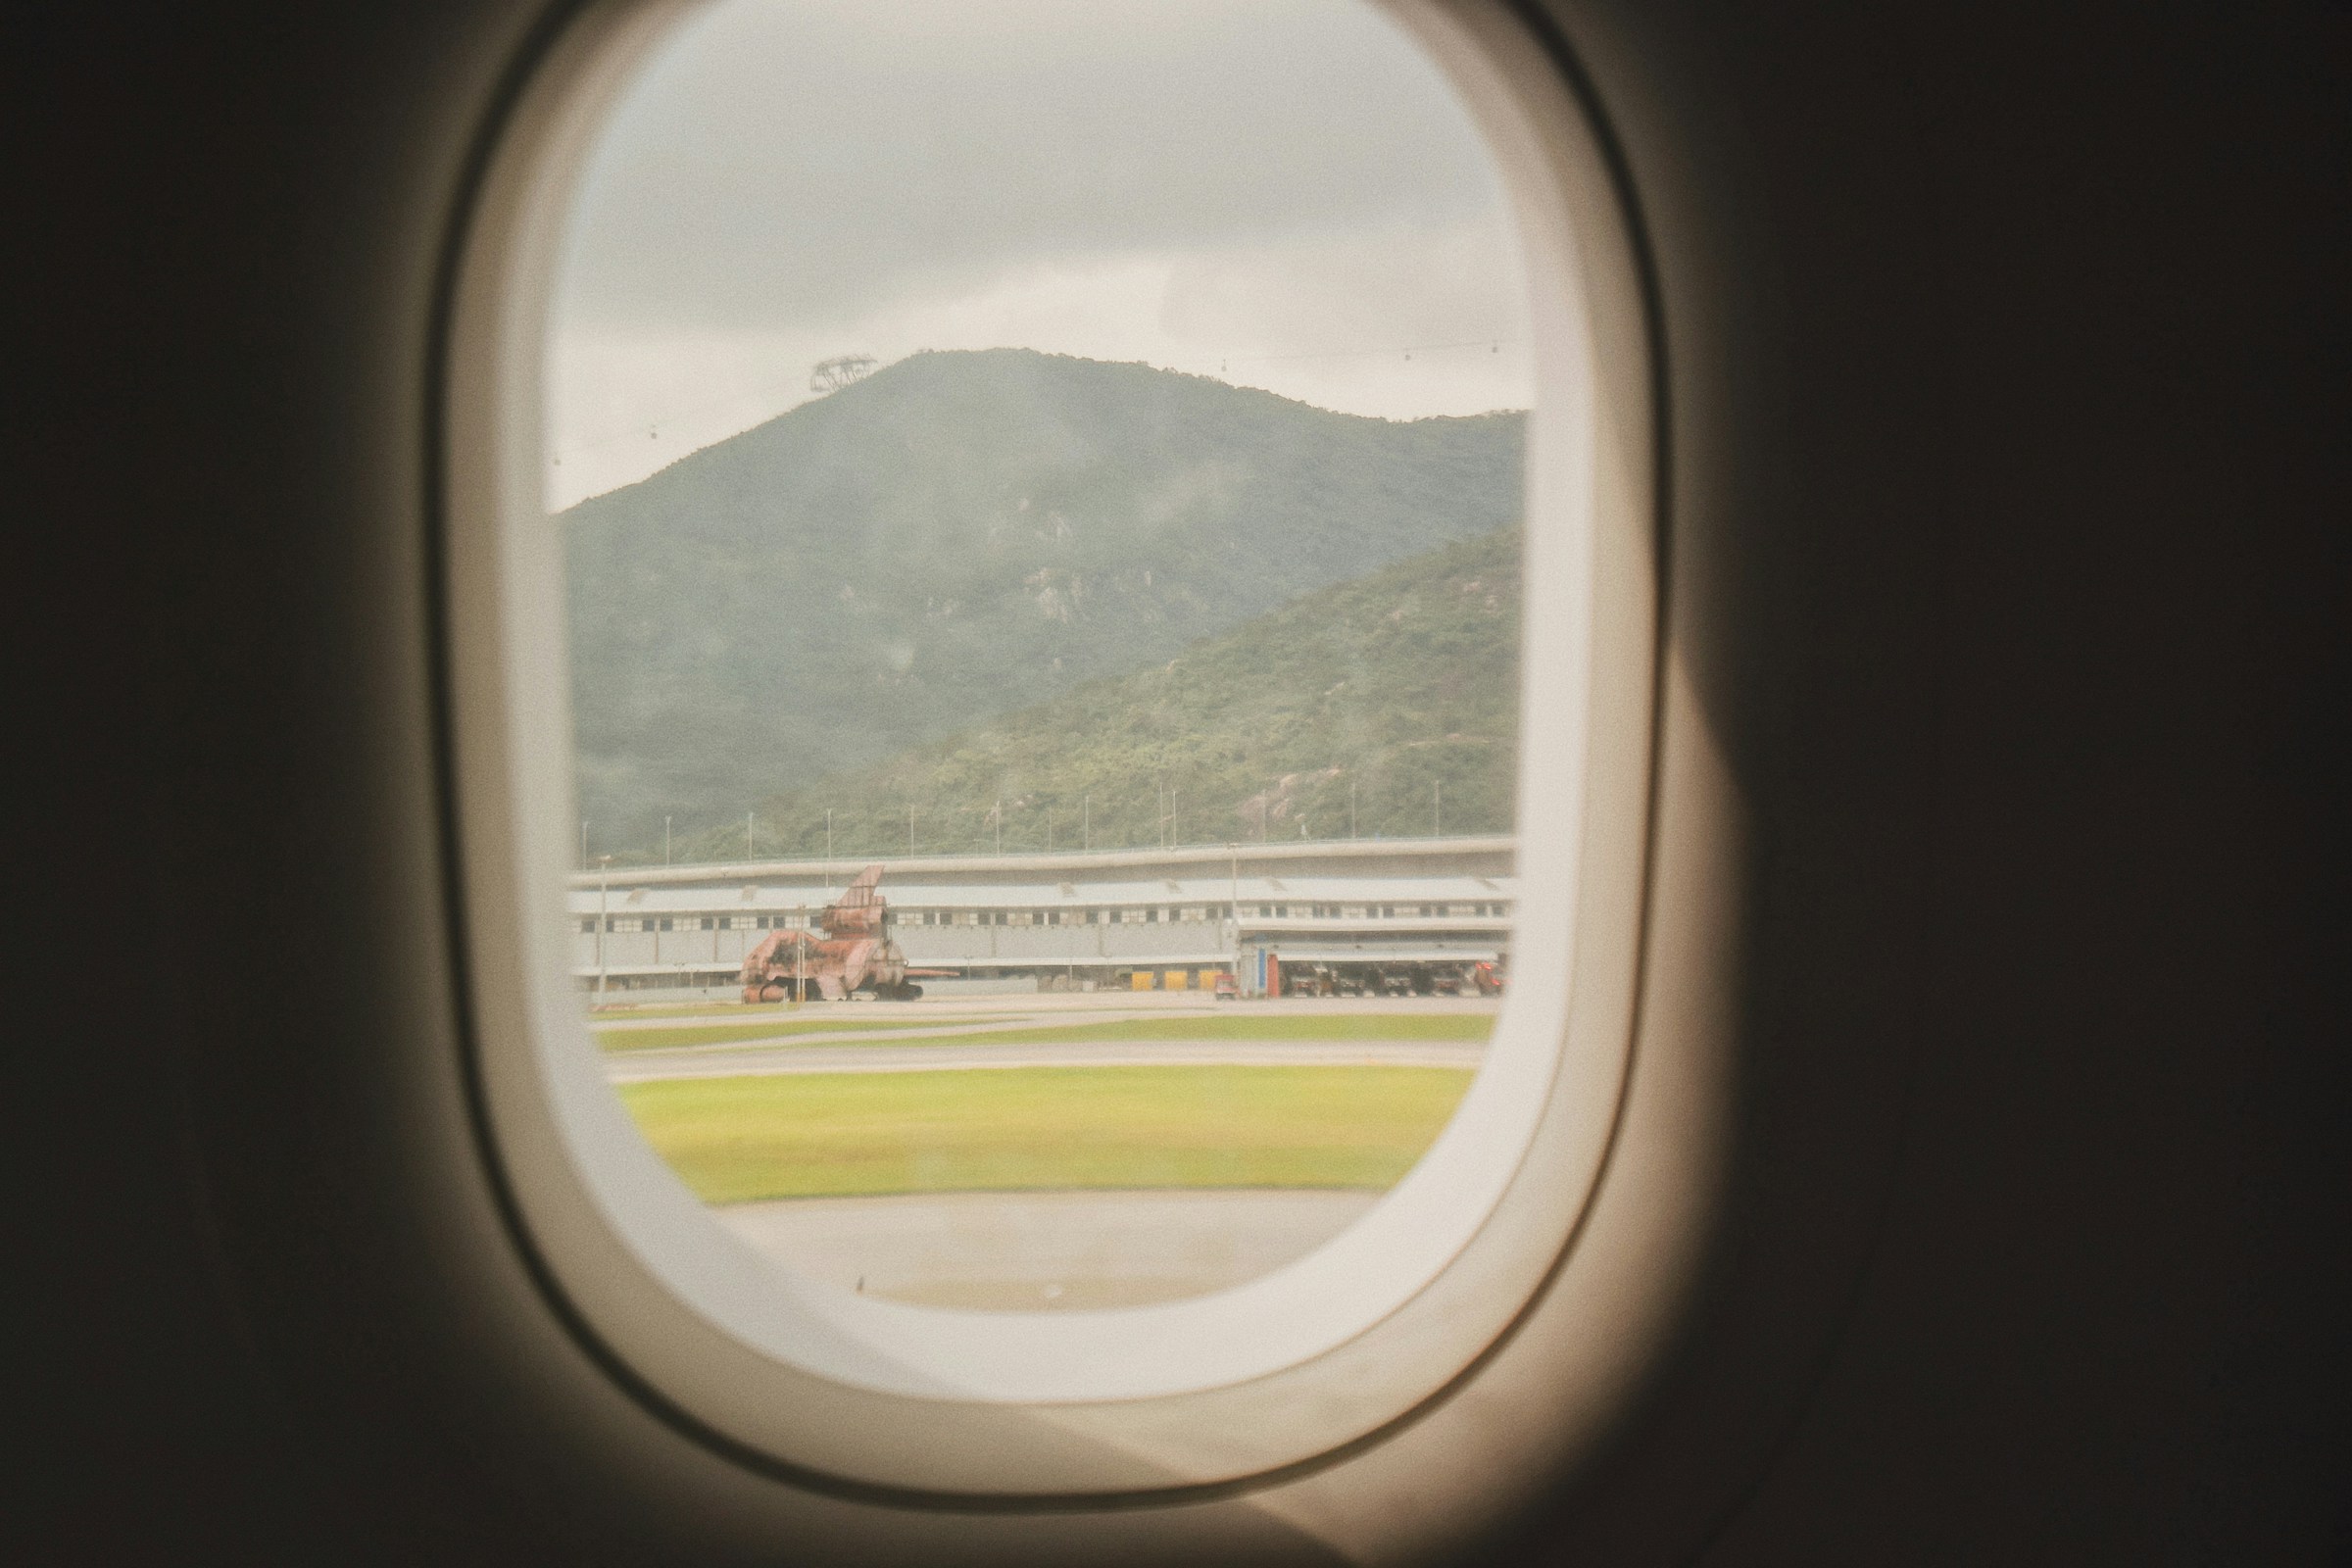 The view from an airplane window | Source: Unsplash